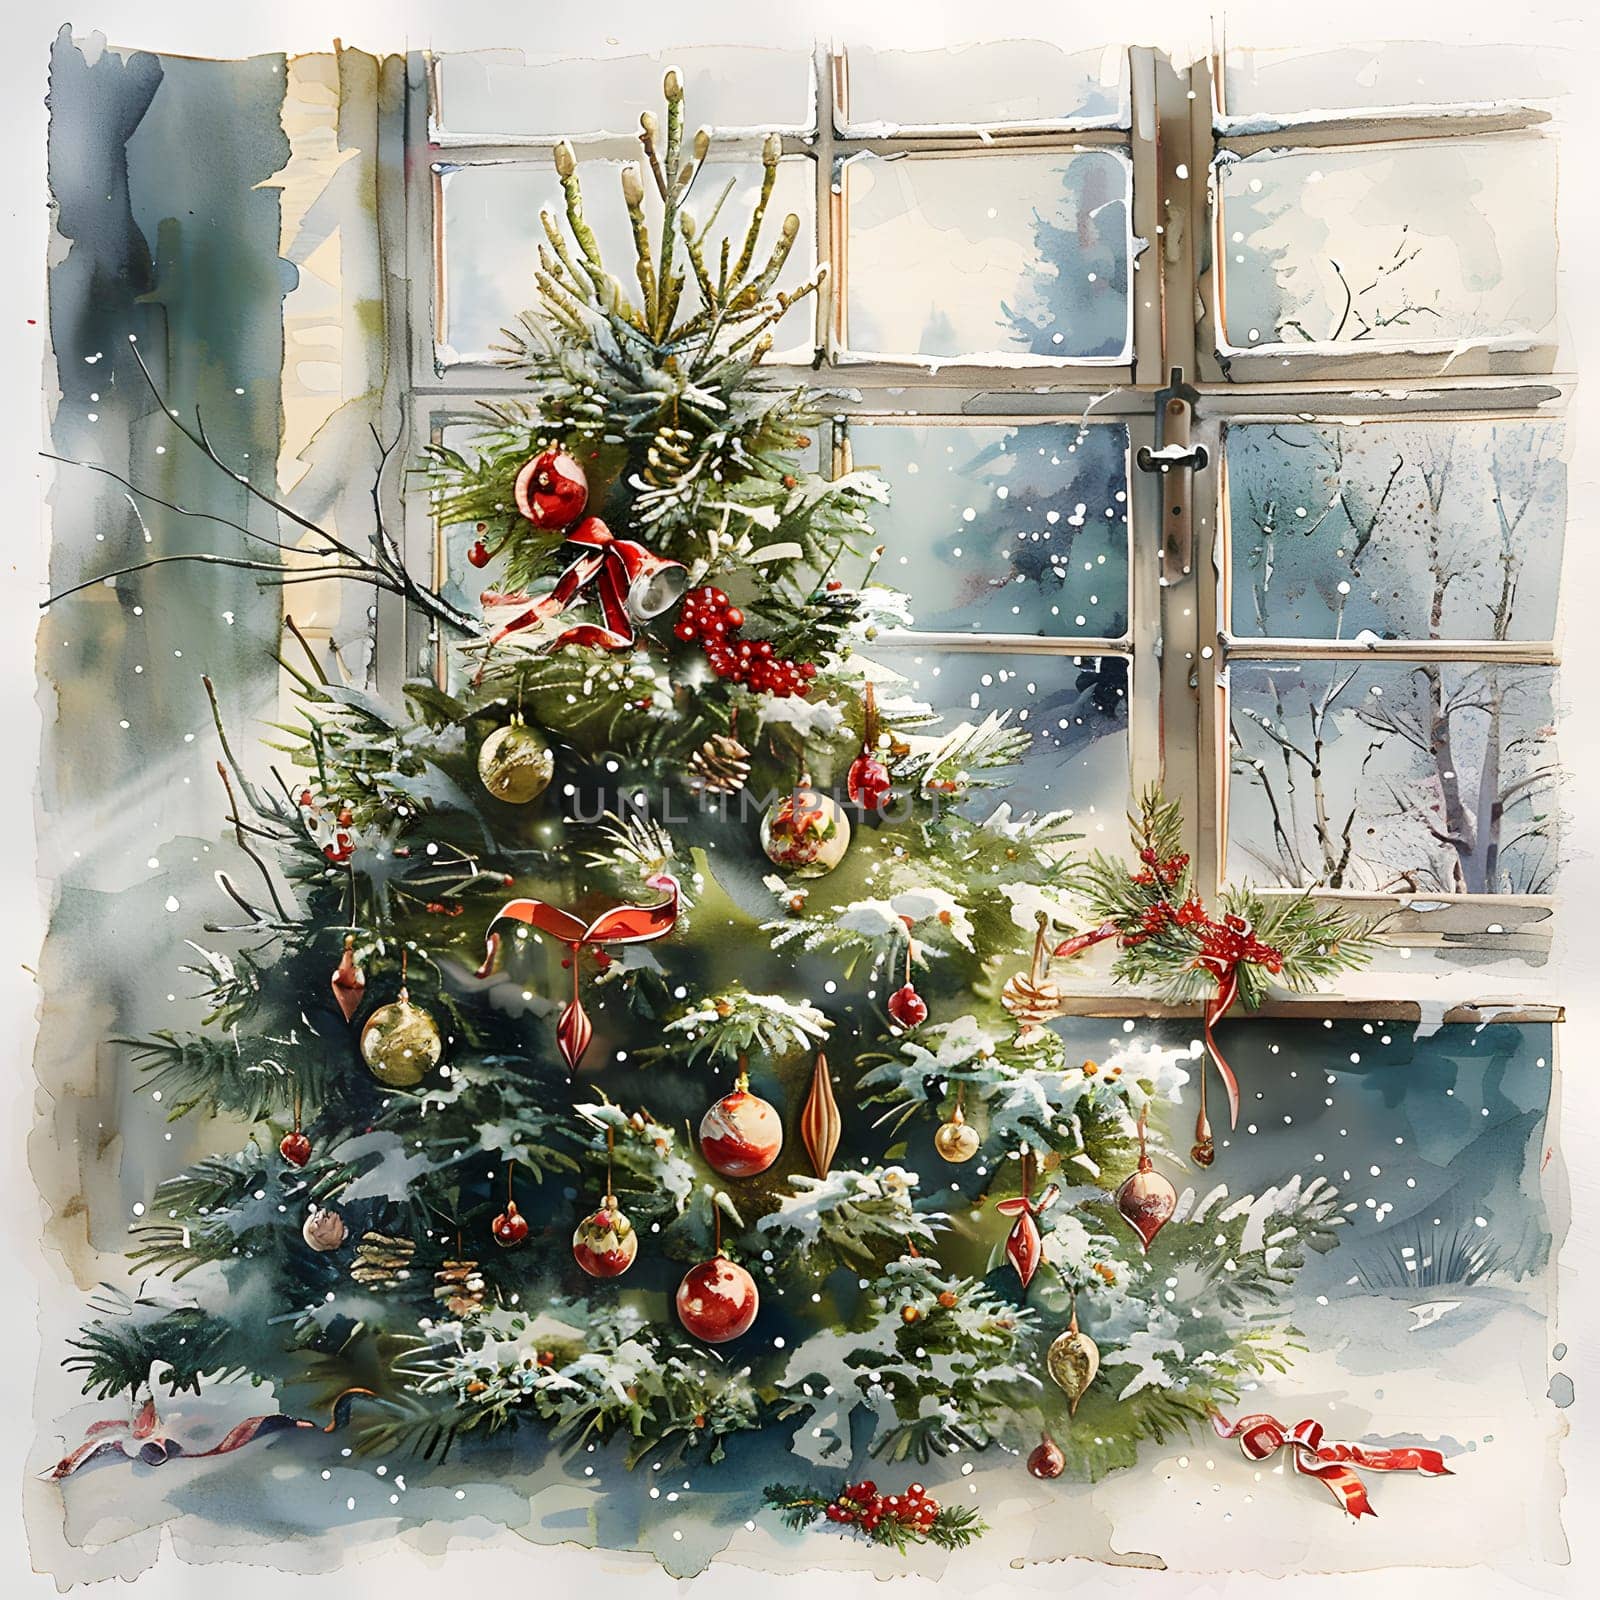 An image featuring a festive Christmas tree with colorful ornaments, positioned in front of a window. The tree branches are adorned with holiday decorations in varying tints and shades